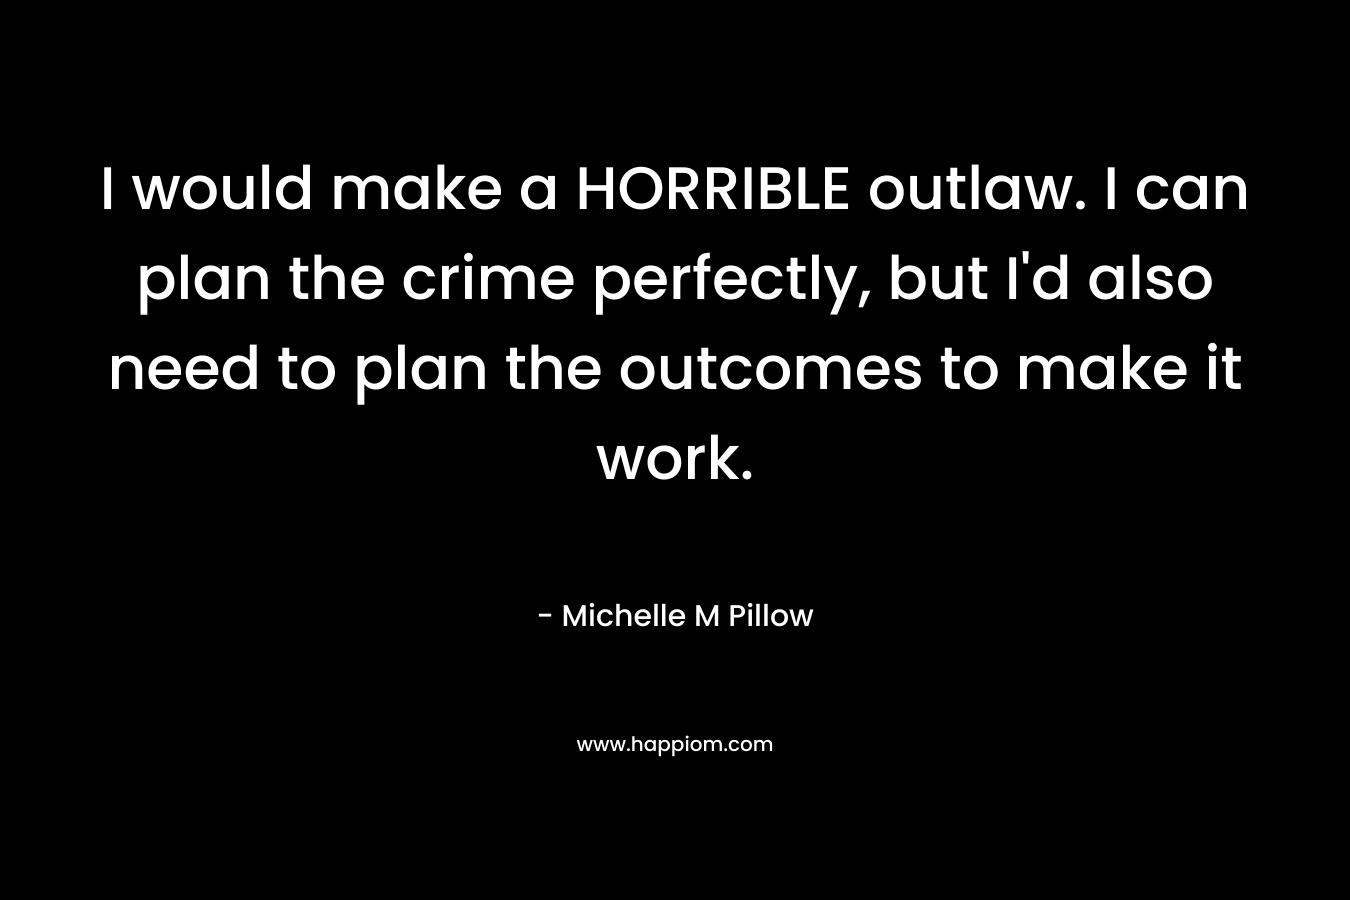 I would make a HORRIBLE outlaw. I can plan the crime perfectly, but I'd also need to plan the outcomes to make it work.